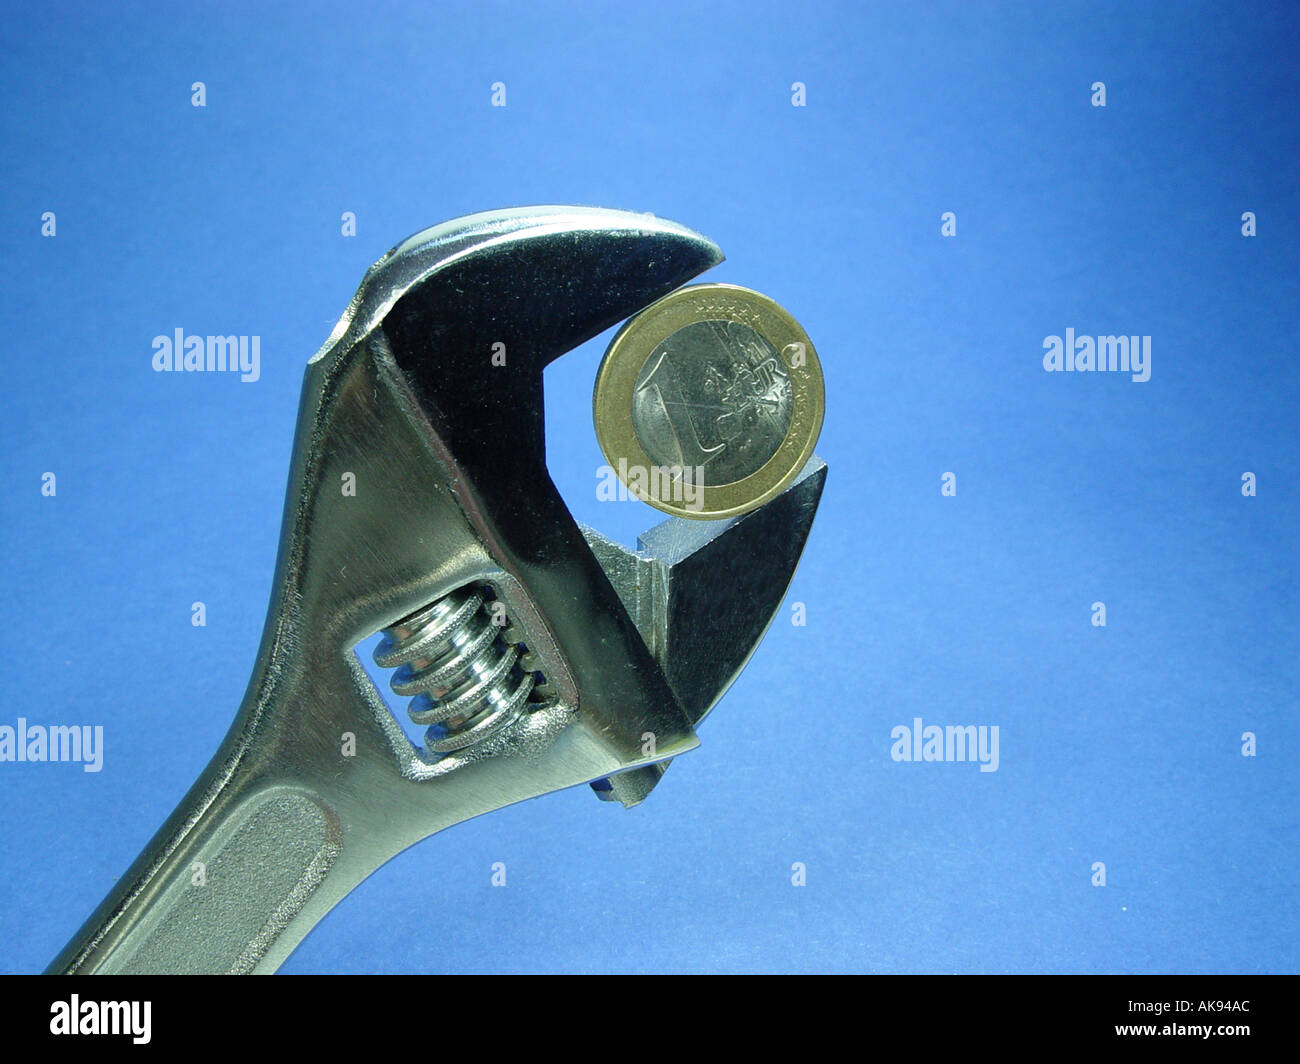 Euro in a wrench as symbol for exchange rate fluctuations in the currency Stock Photo